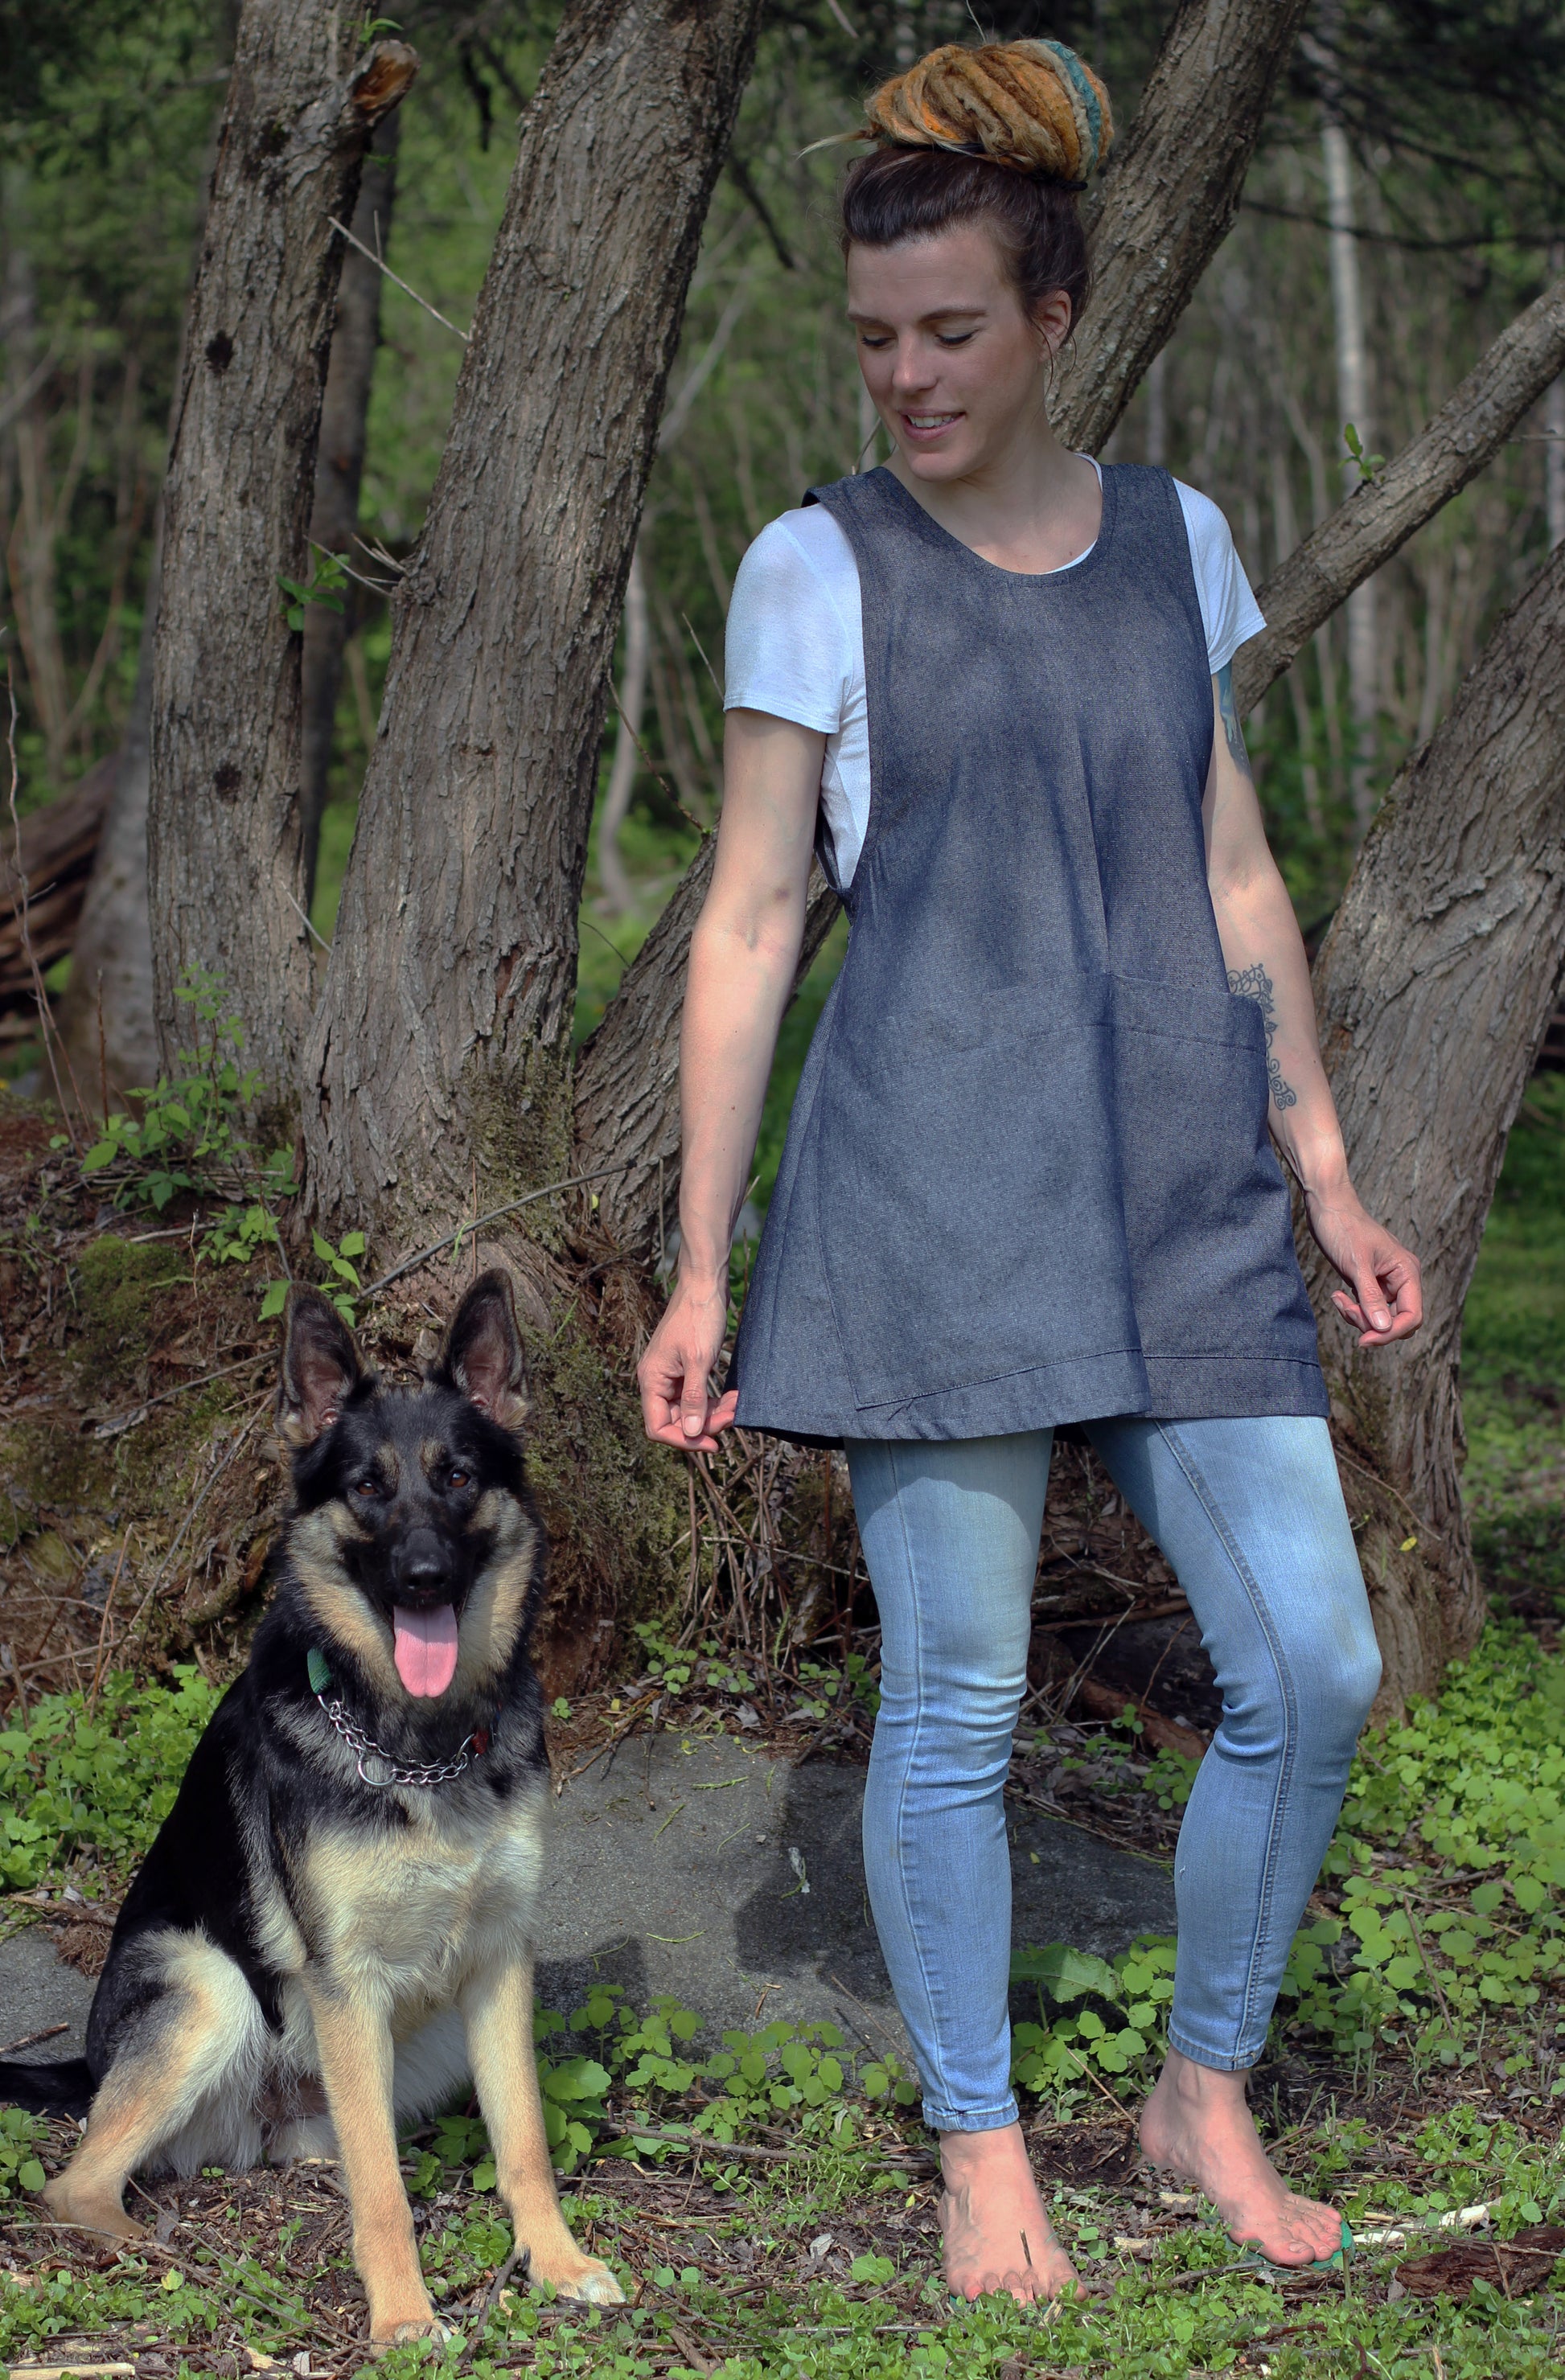 XS-5X Smock #2 in Denim - Front View with Dog